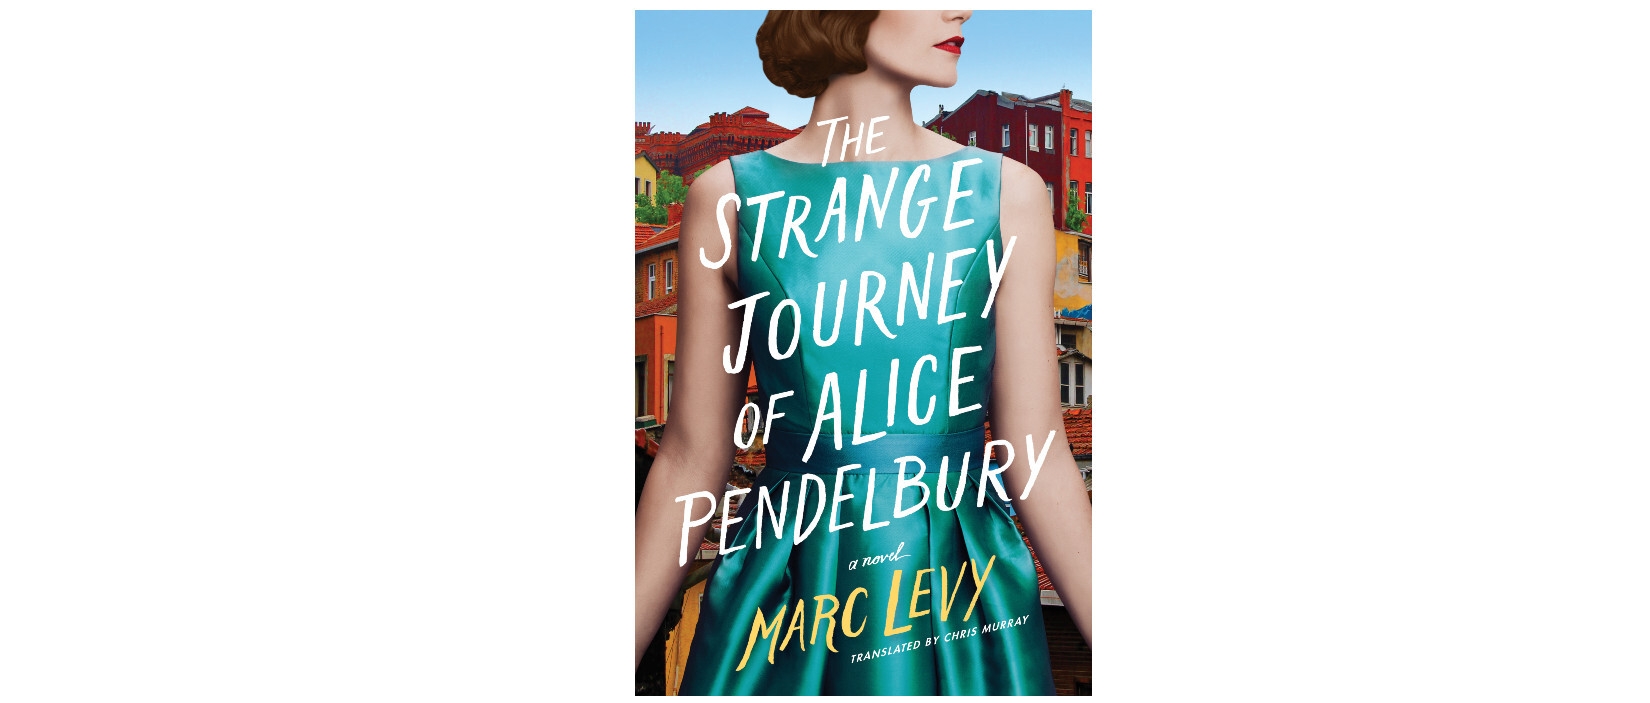 The book cover of "The Strange Journey of Alice Pendelbury" features a woman from the nose down to her hips wearing a sleeveless seafoam dress. The woman has short brown hair, wears red lipstick and her head is turned to her left. Behind the woman is a city with homes stacked on top of one another.